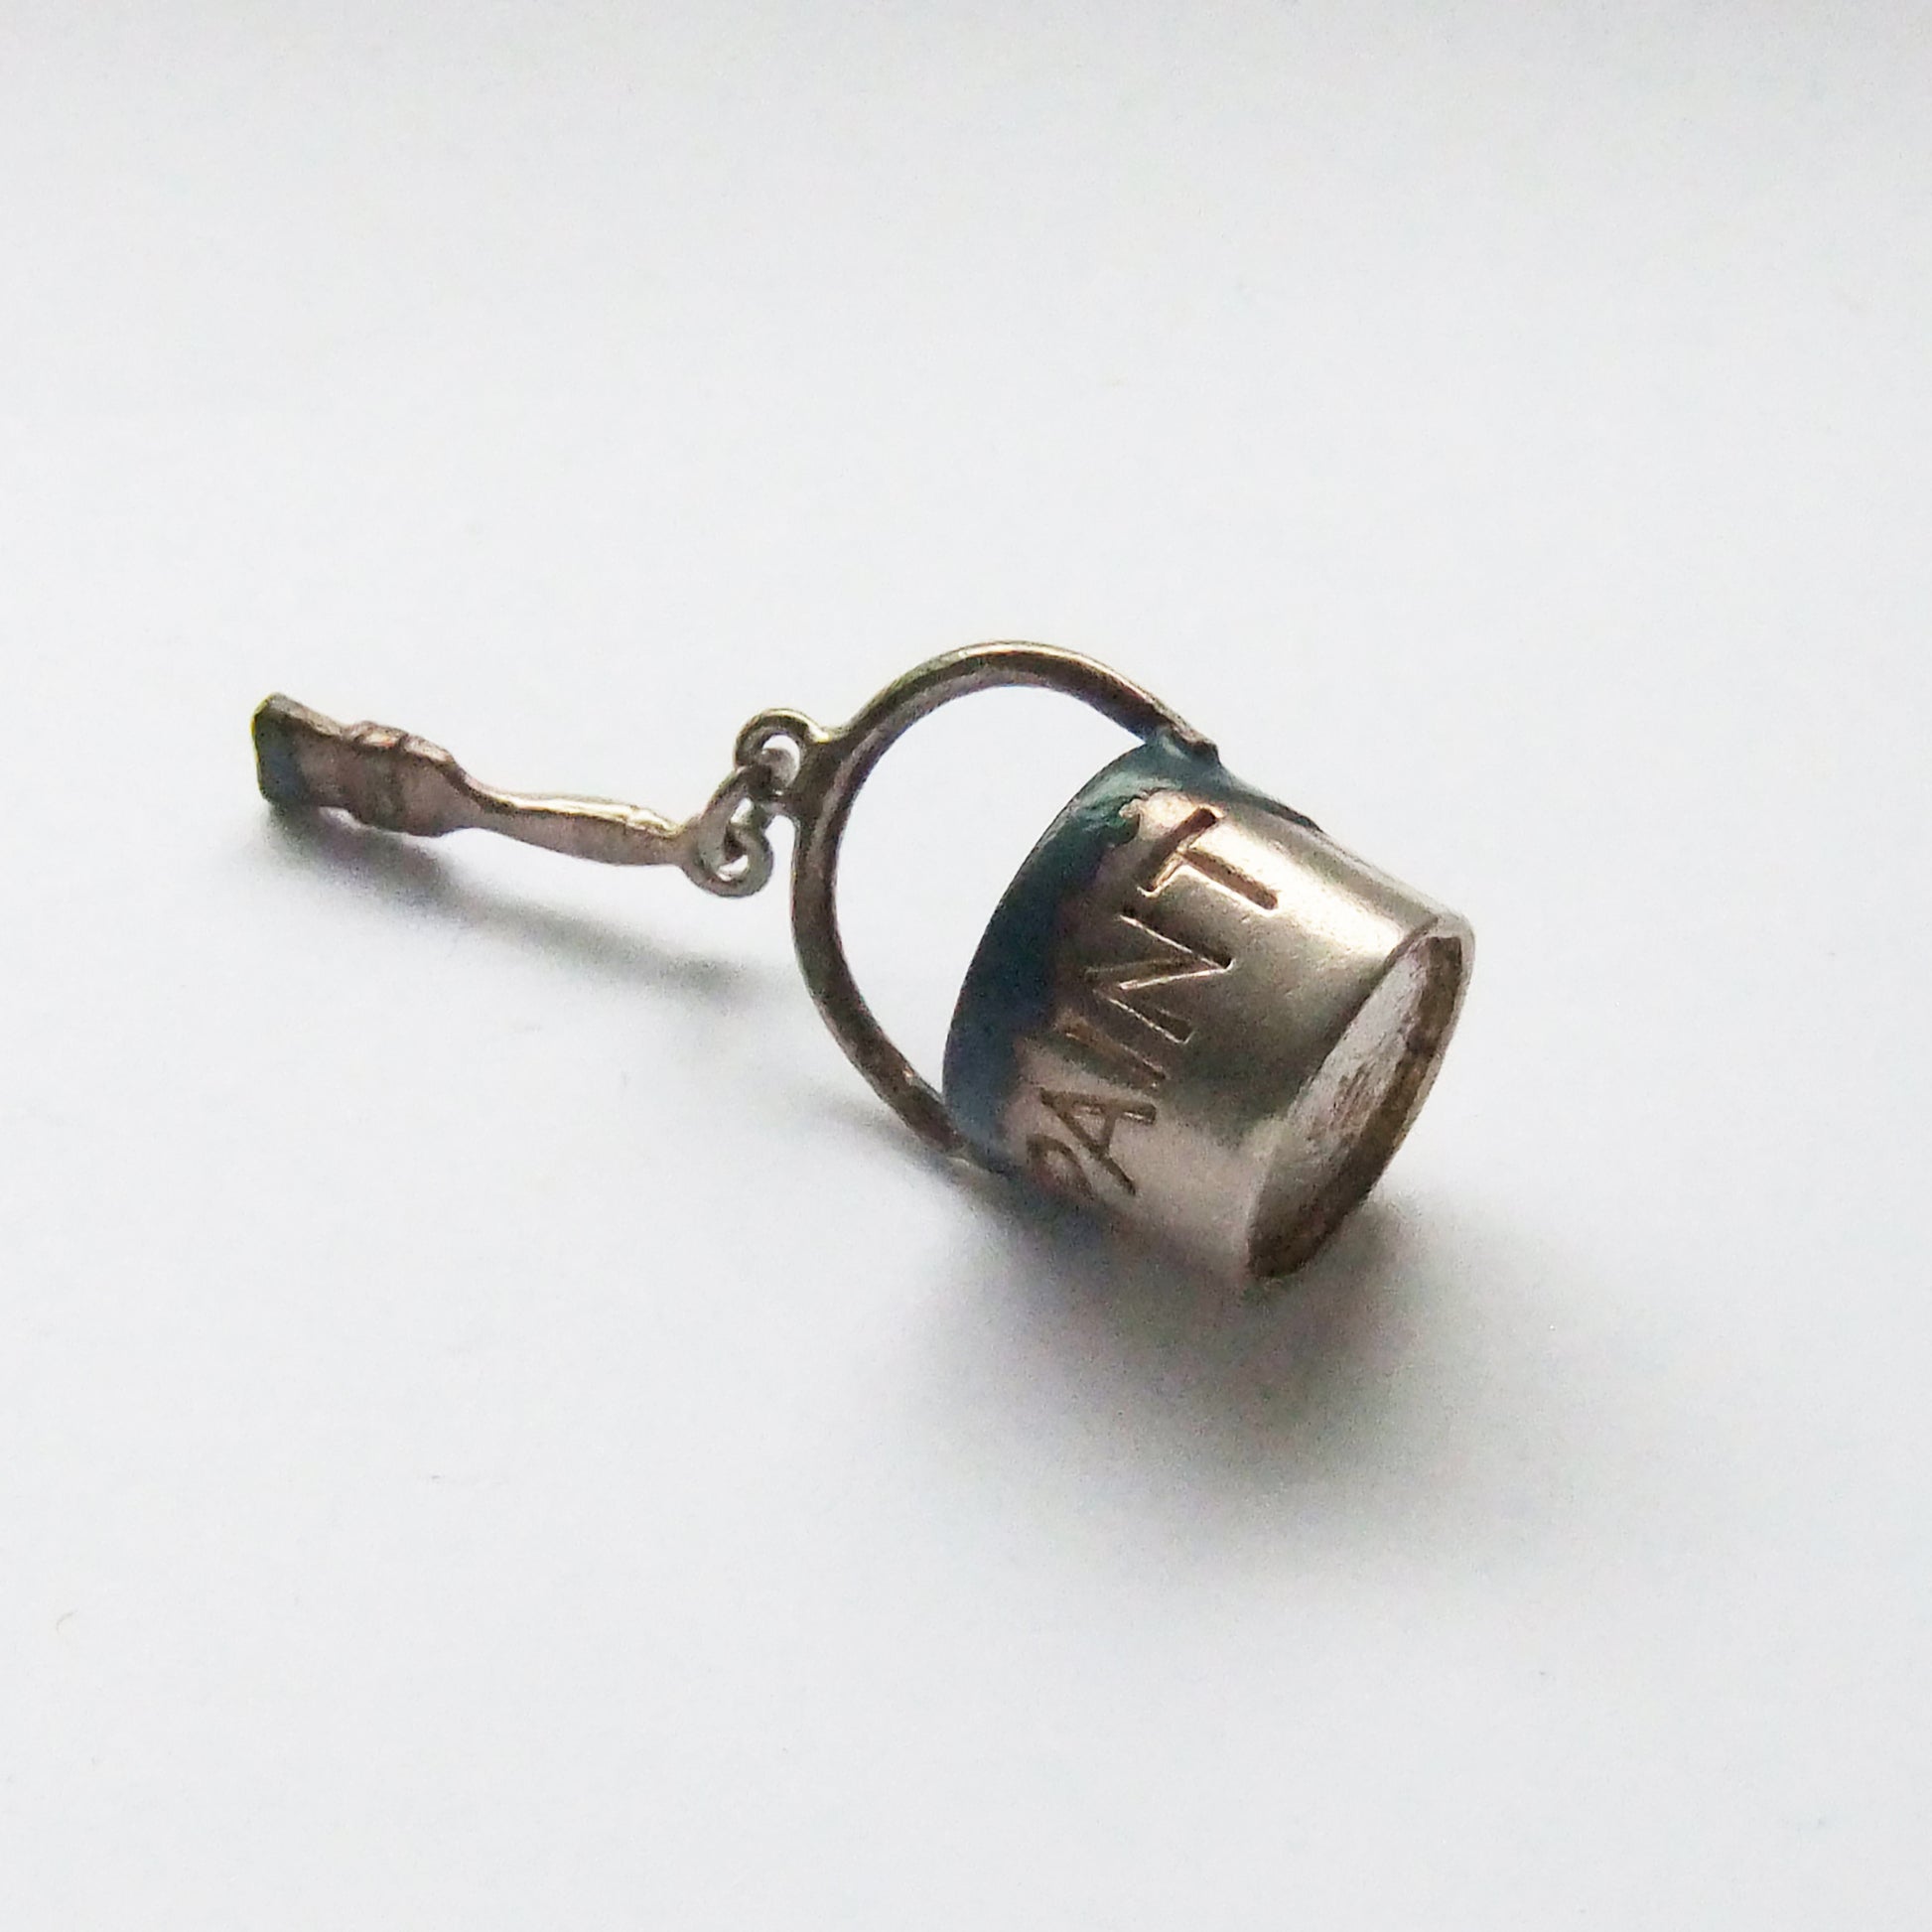 Nuvo Paint Pot and Brush Vintage Sterling Silver Enamel Charm